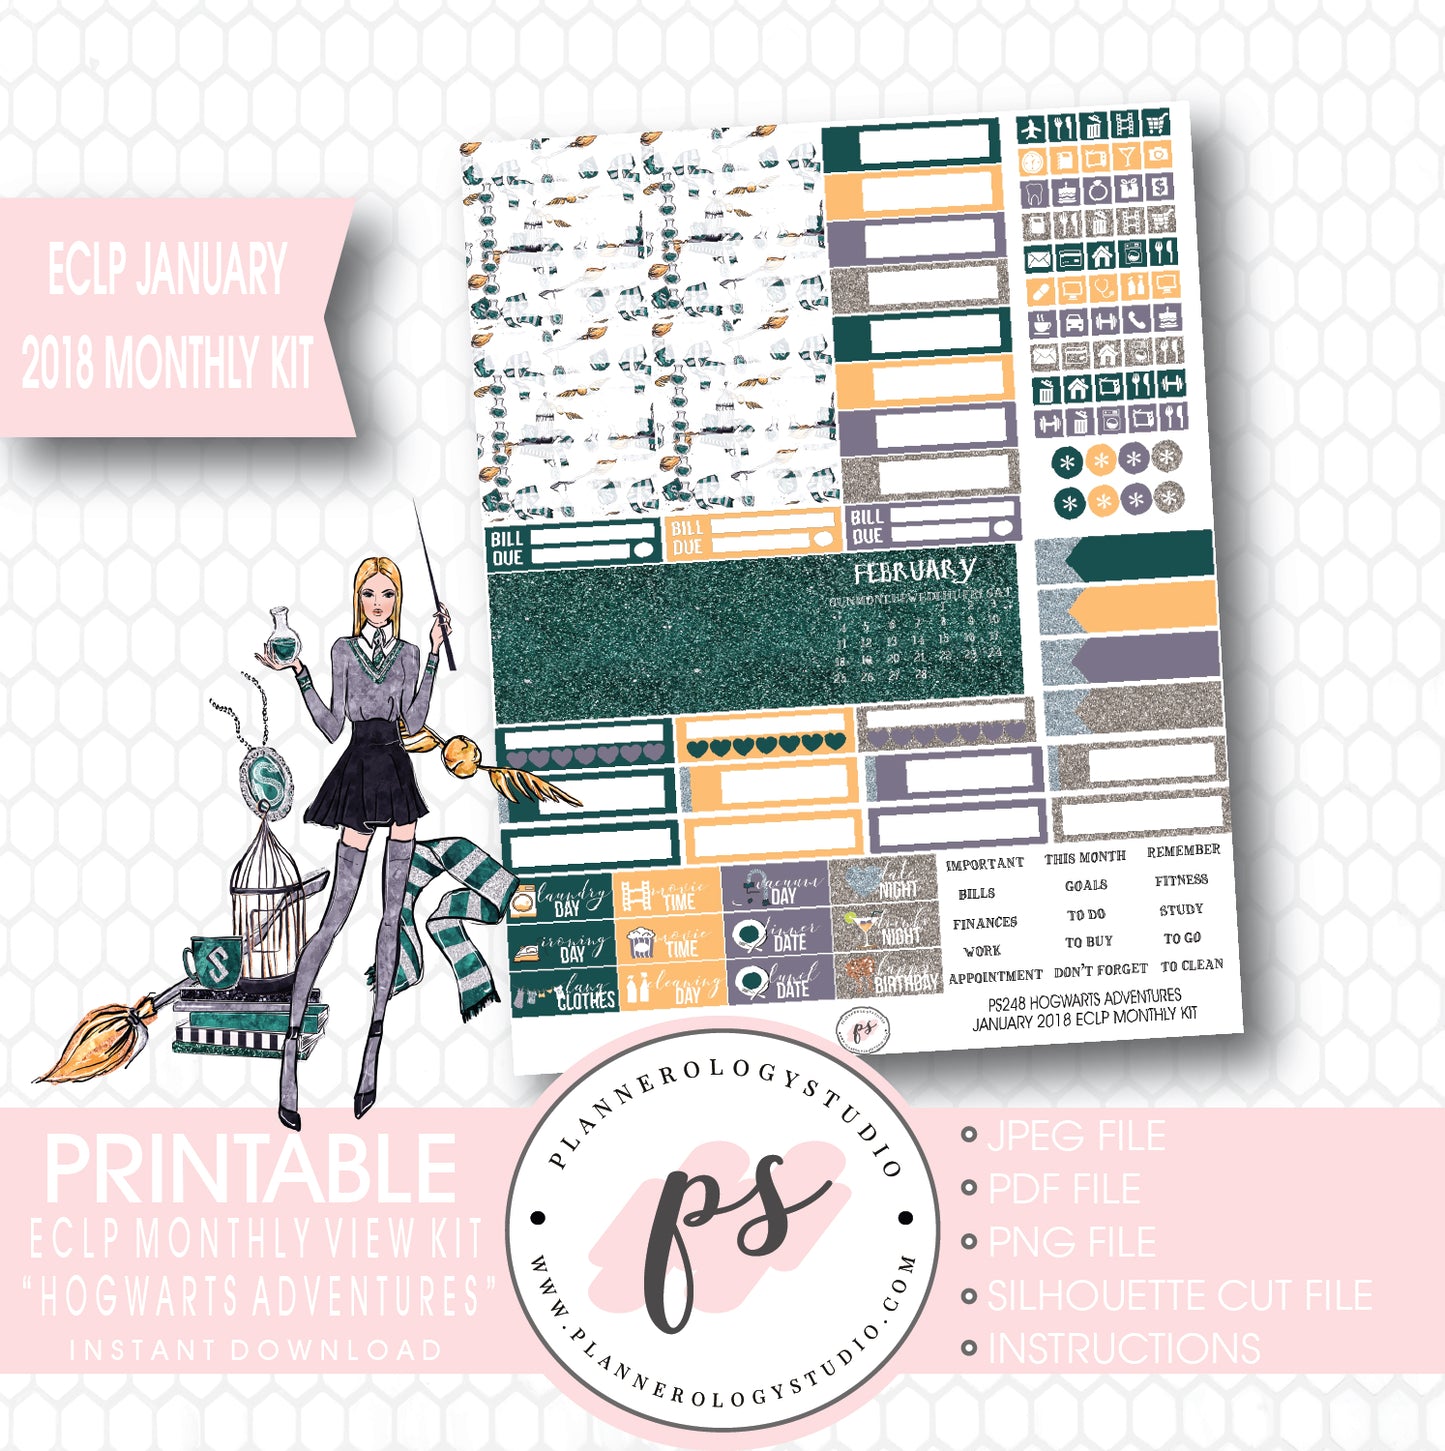 Hogwarts Adventures (Harry Potter Theme) January 2018 Monthly View Kit Printable Planner Stickers (for use with ECLP) - Plannerologystudio